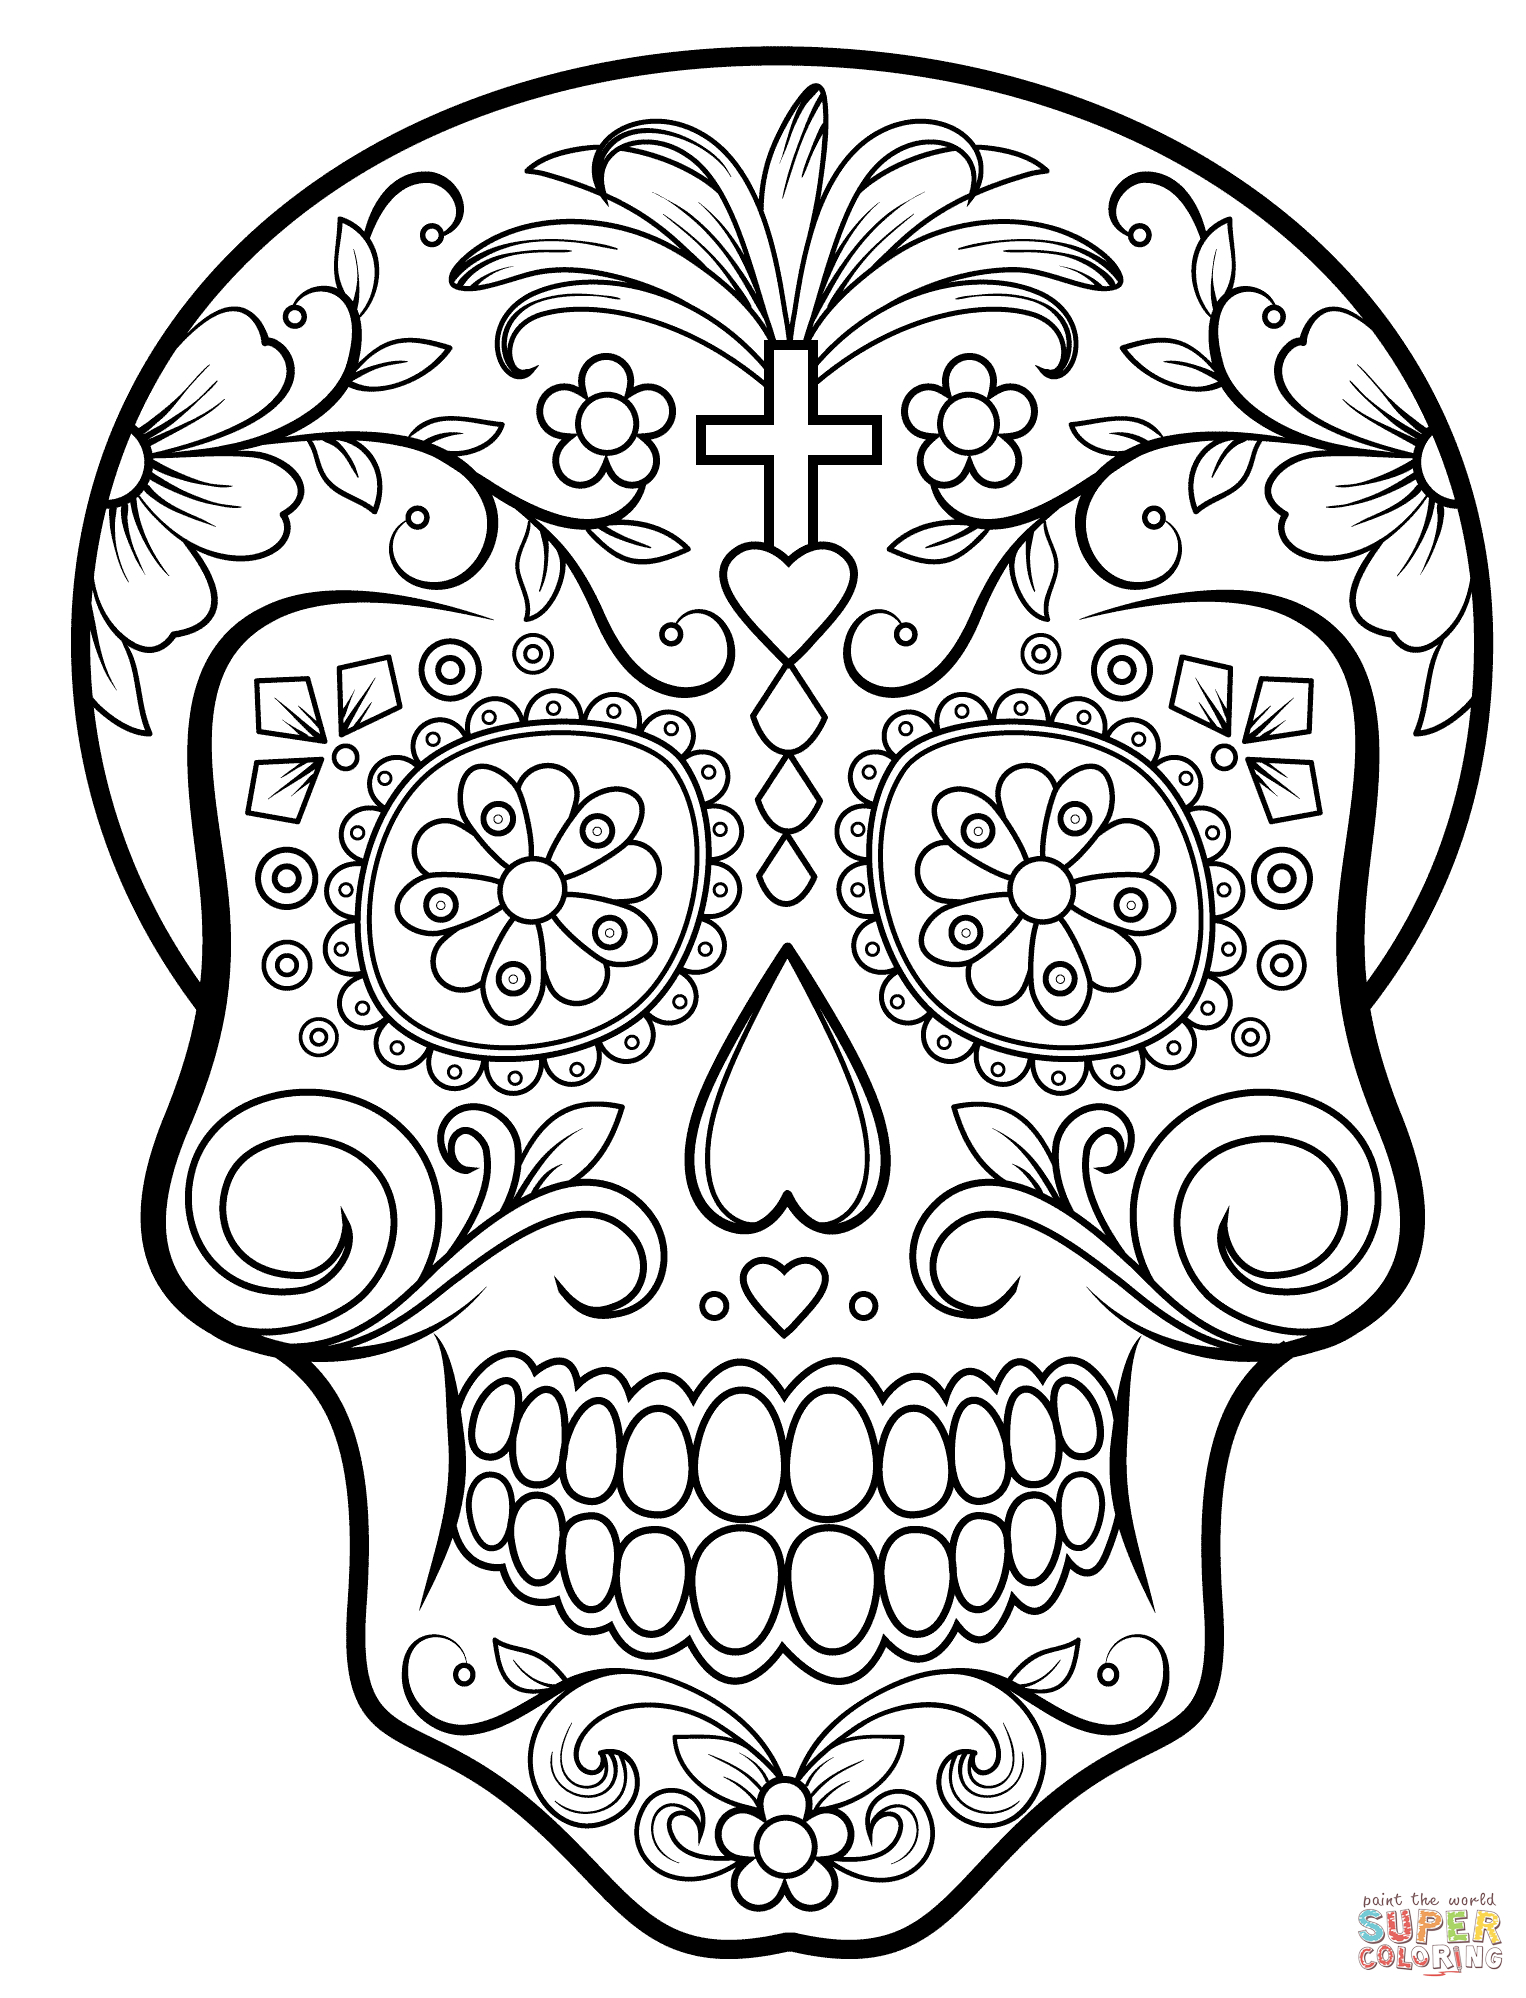 Day Of The Dead Sugar Skull Coloring Page | Free Printable - Free Printable Sugar Skull Day Of The Dead Mask